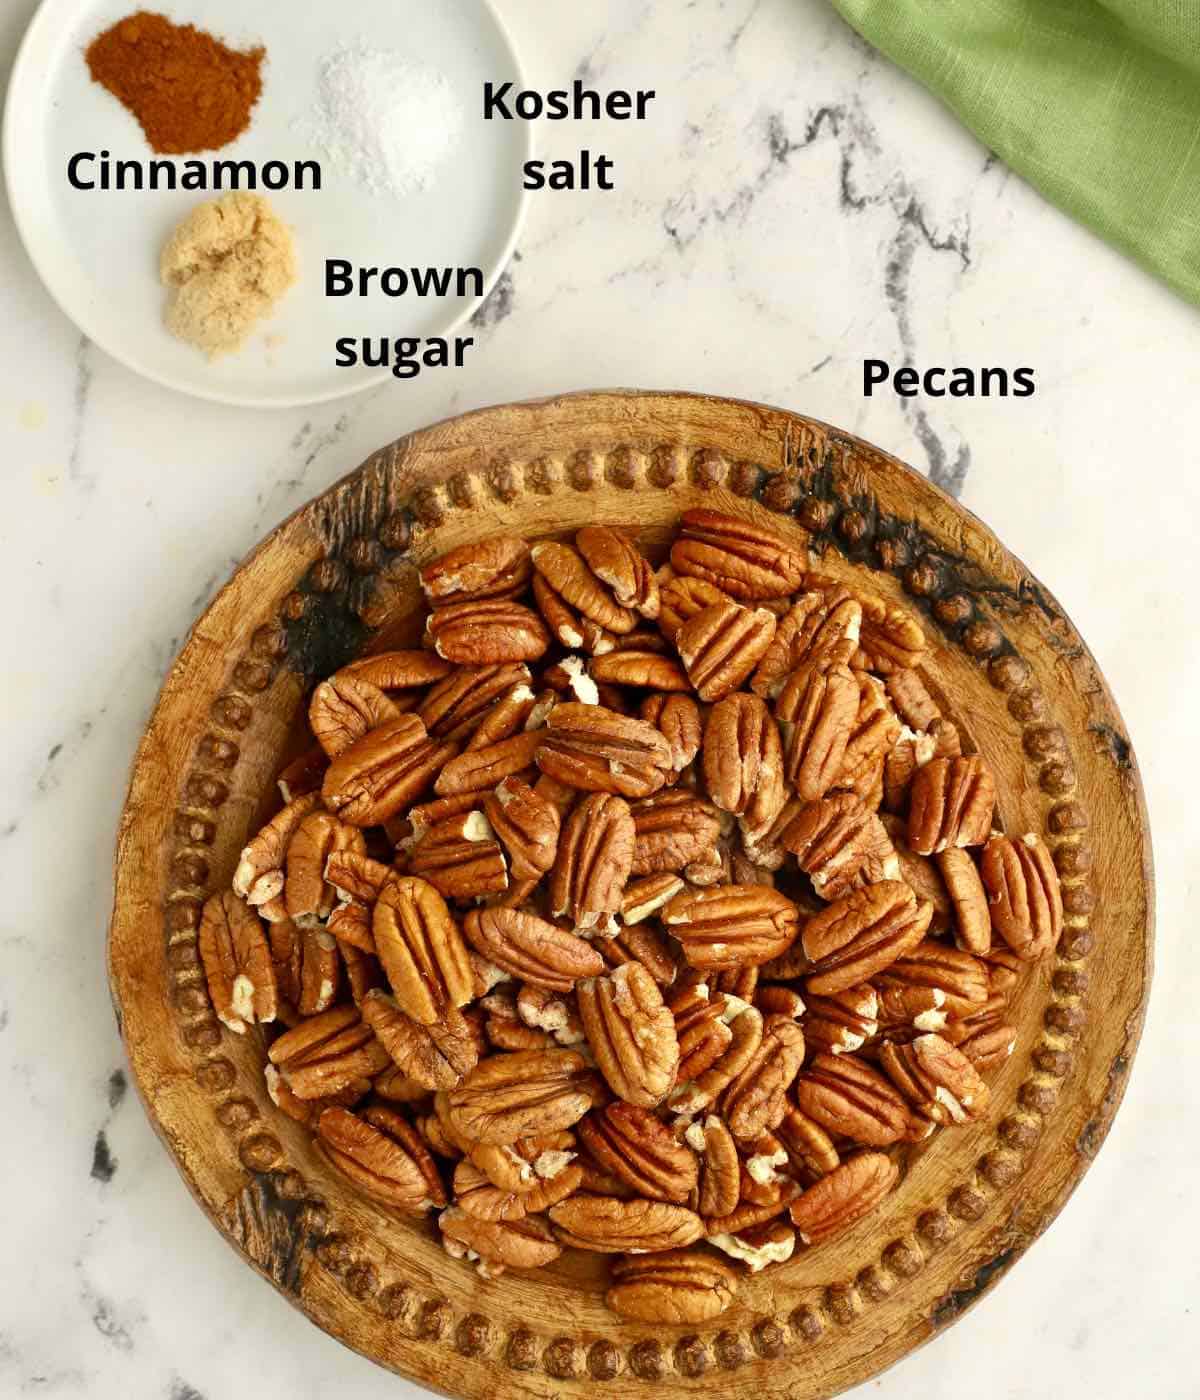 Raw pecans on a wooden plate, plus salt and cinnamon on a smaller plate. 